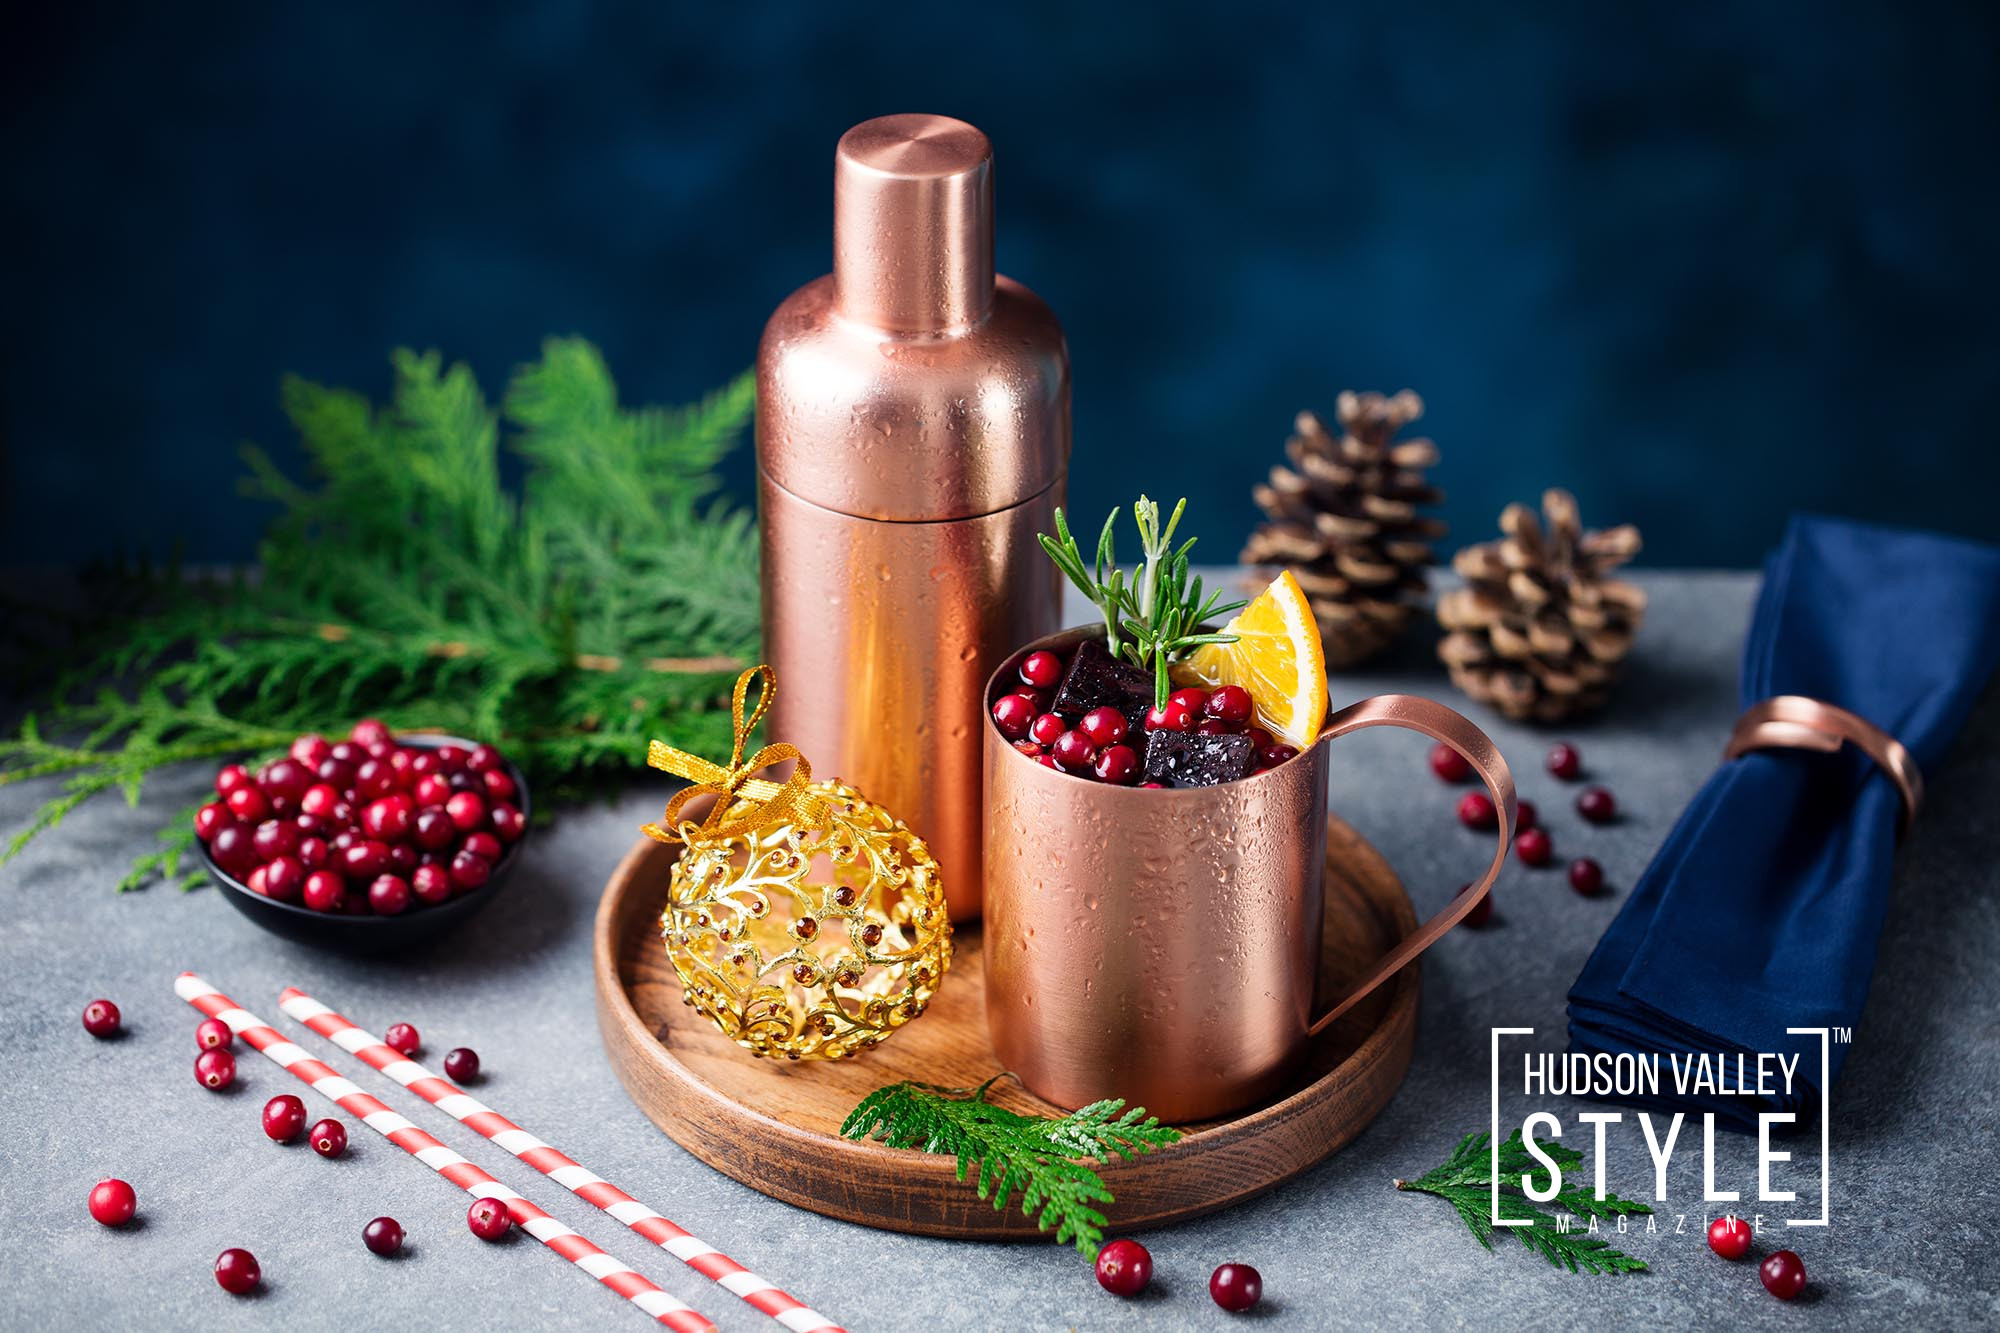 Get into the holiday spirit: Tips for gifting the perfect drinks for any occasion